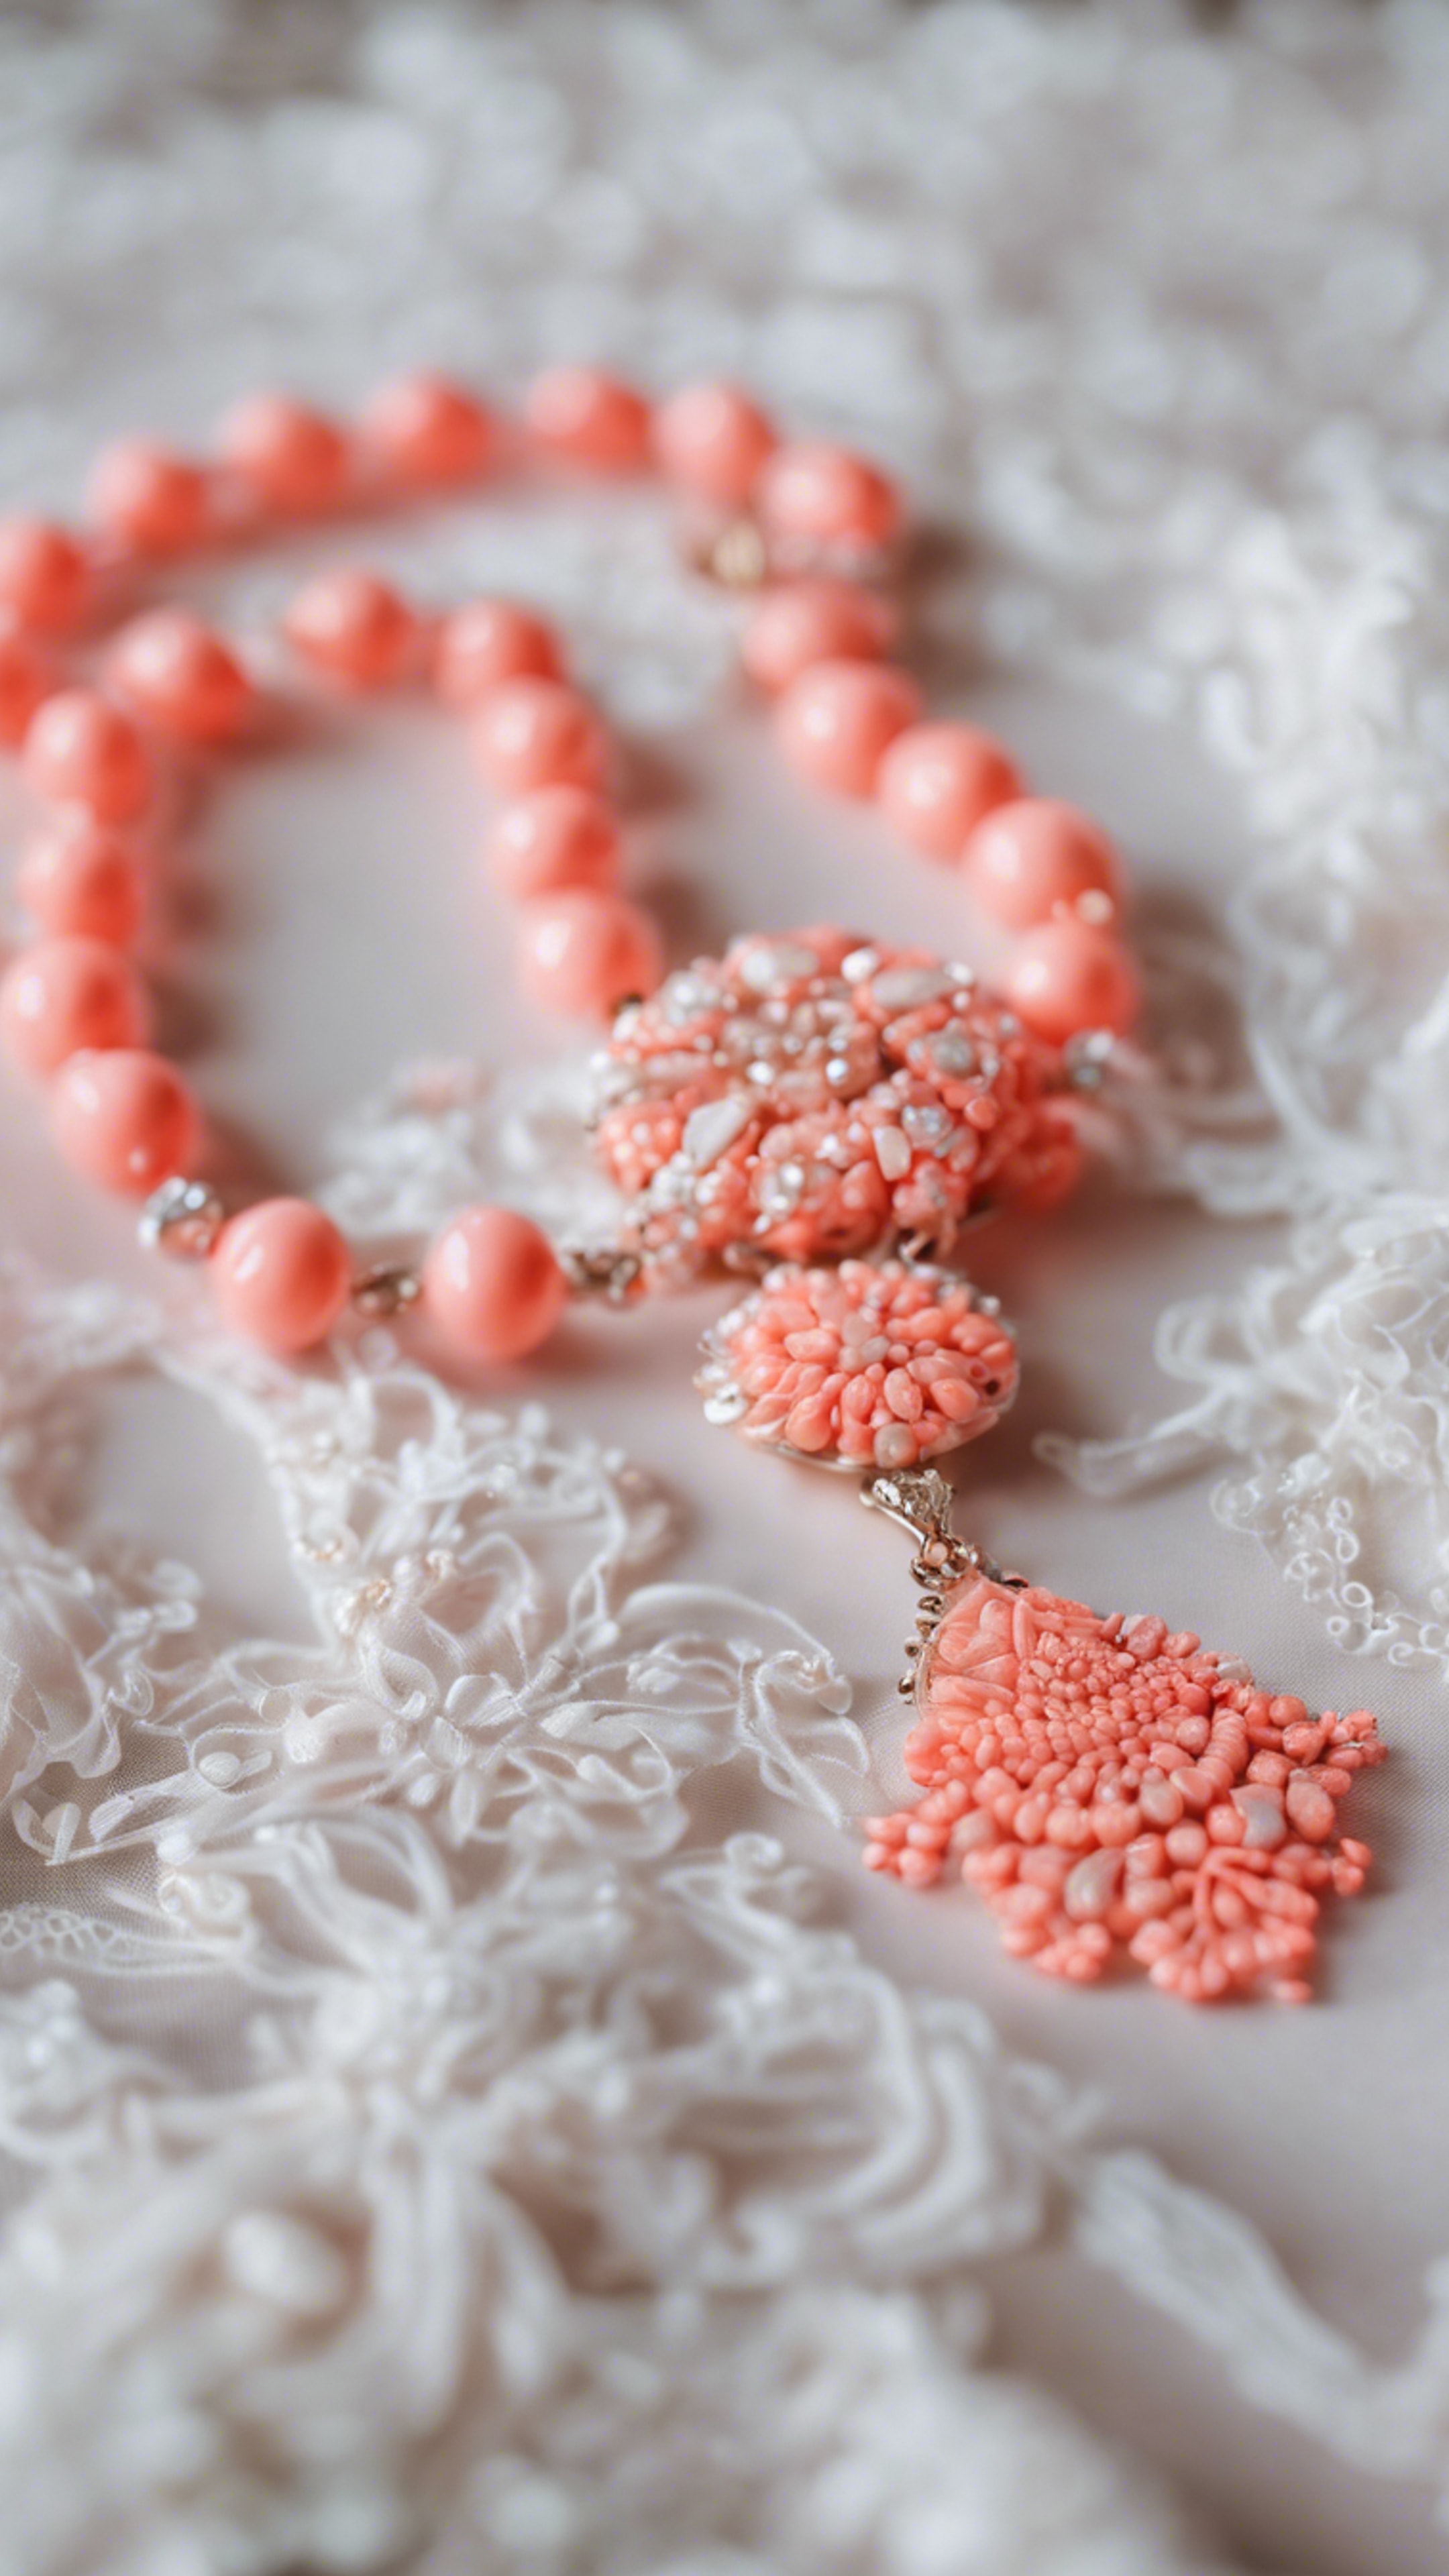 A preppy neon coral necklace against a white lace dress. Wallpaper[7558fb99fbaf41faa5f9]